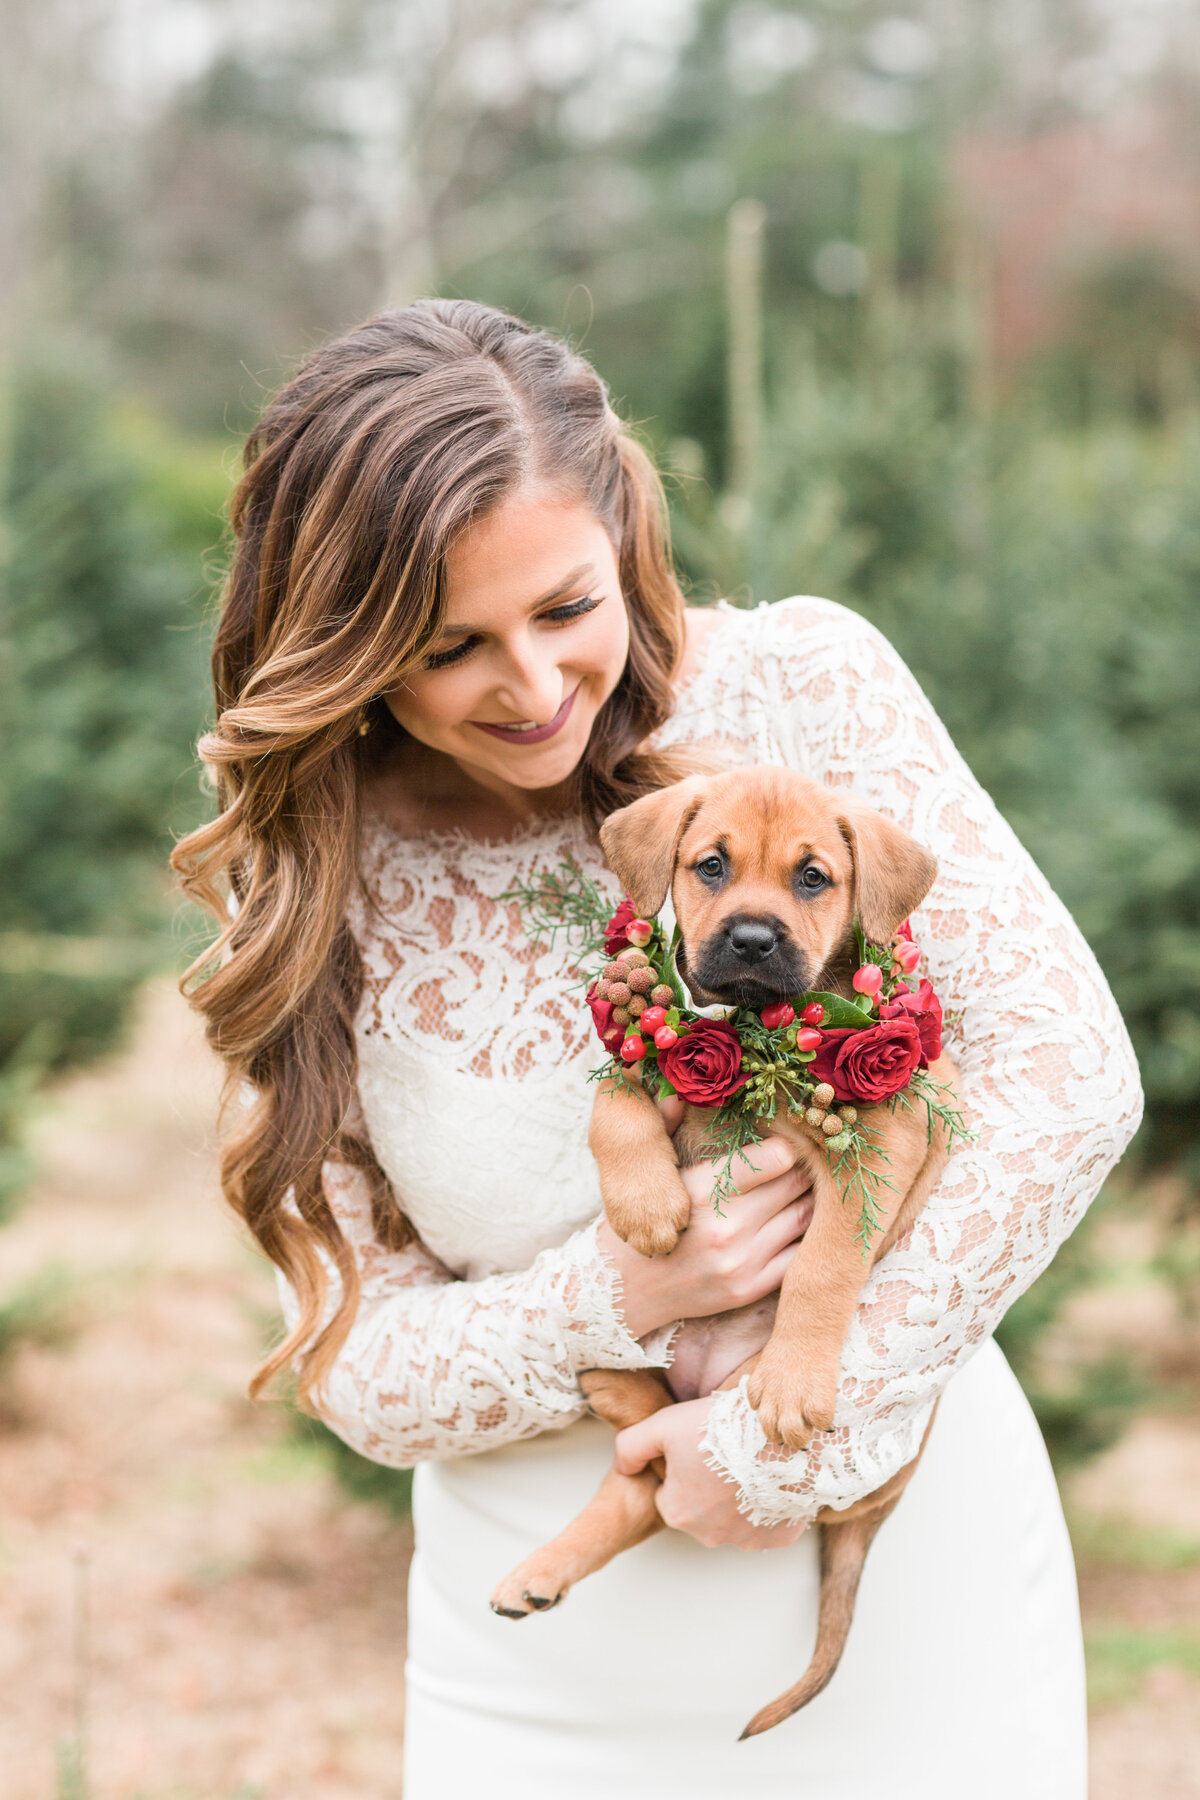 Bride holding an adoptable puppy in a flower collar